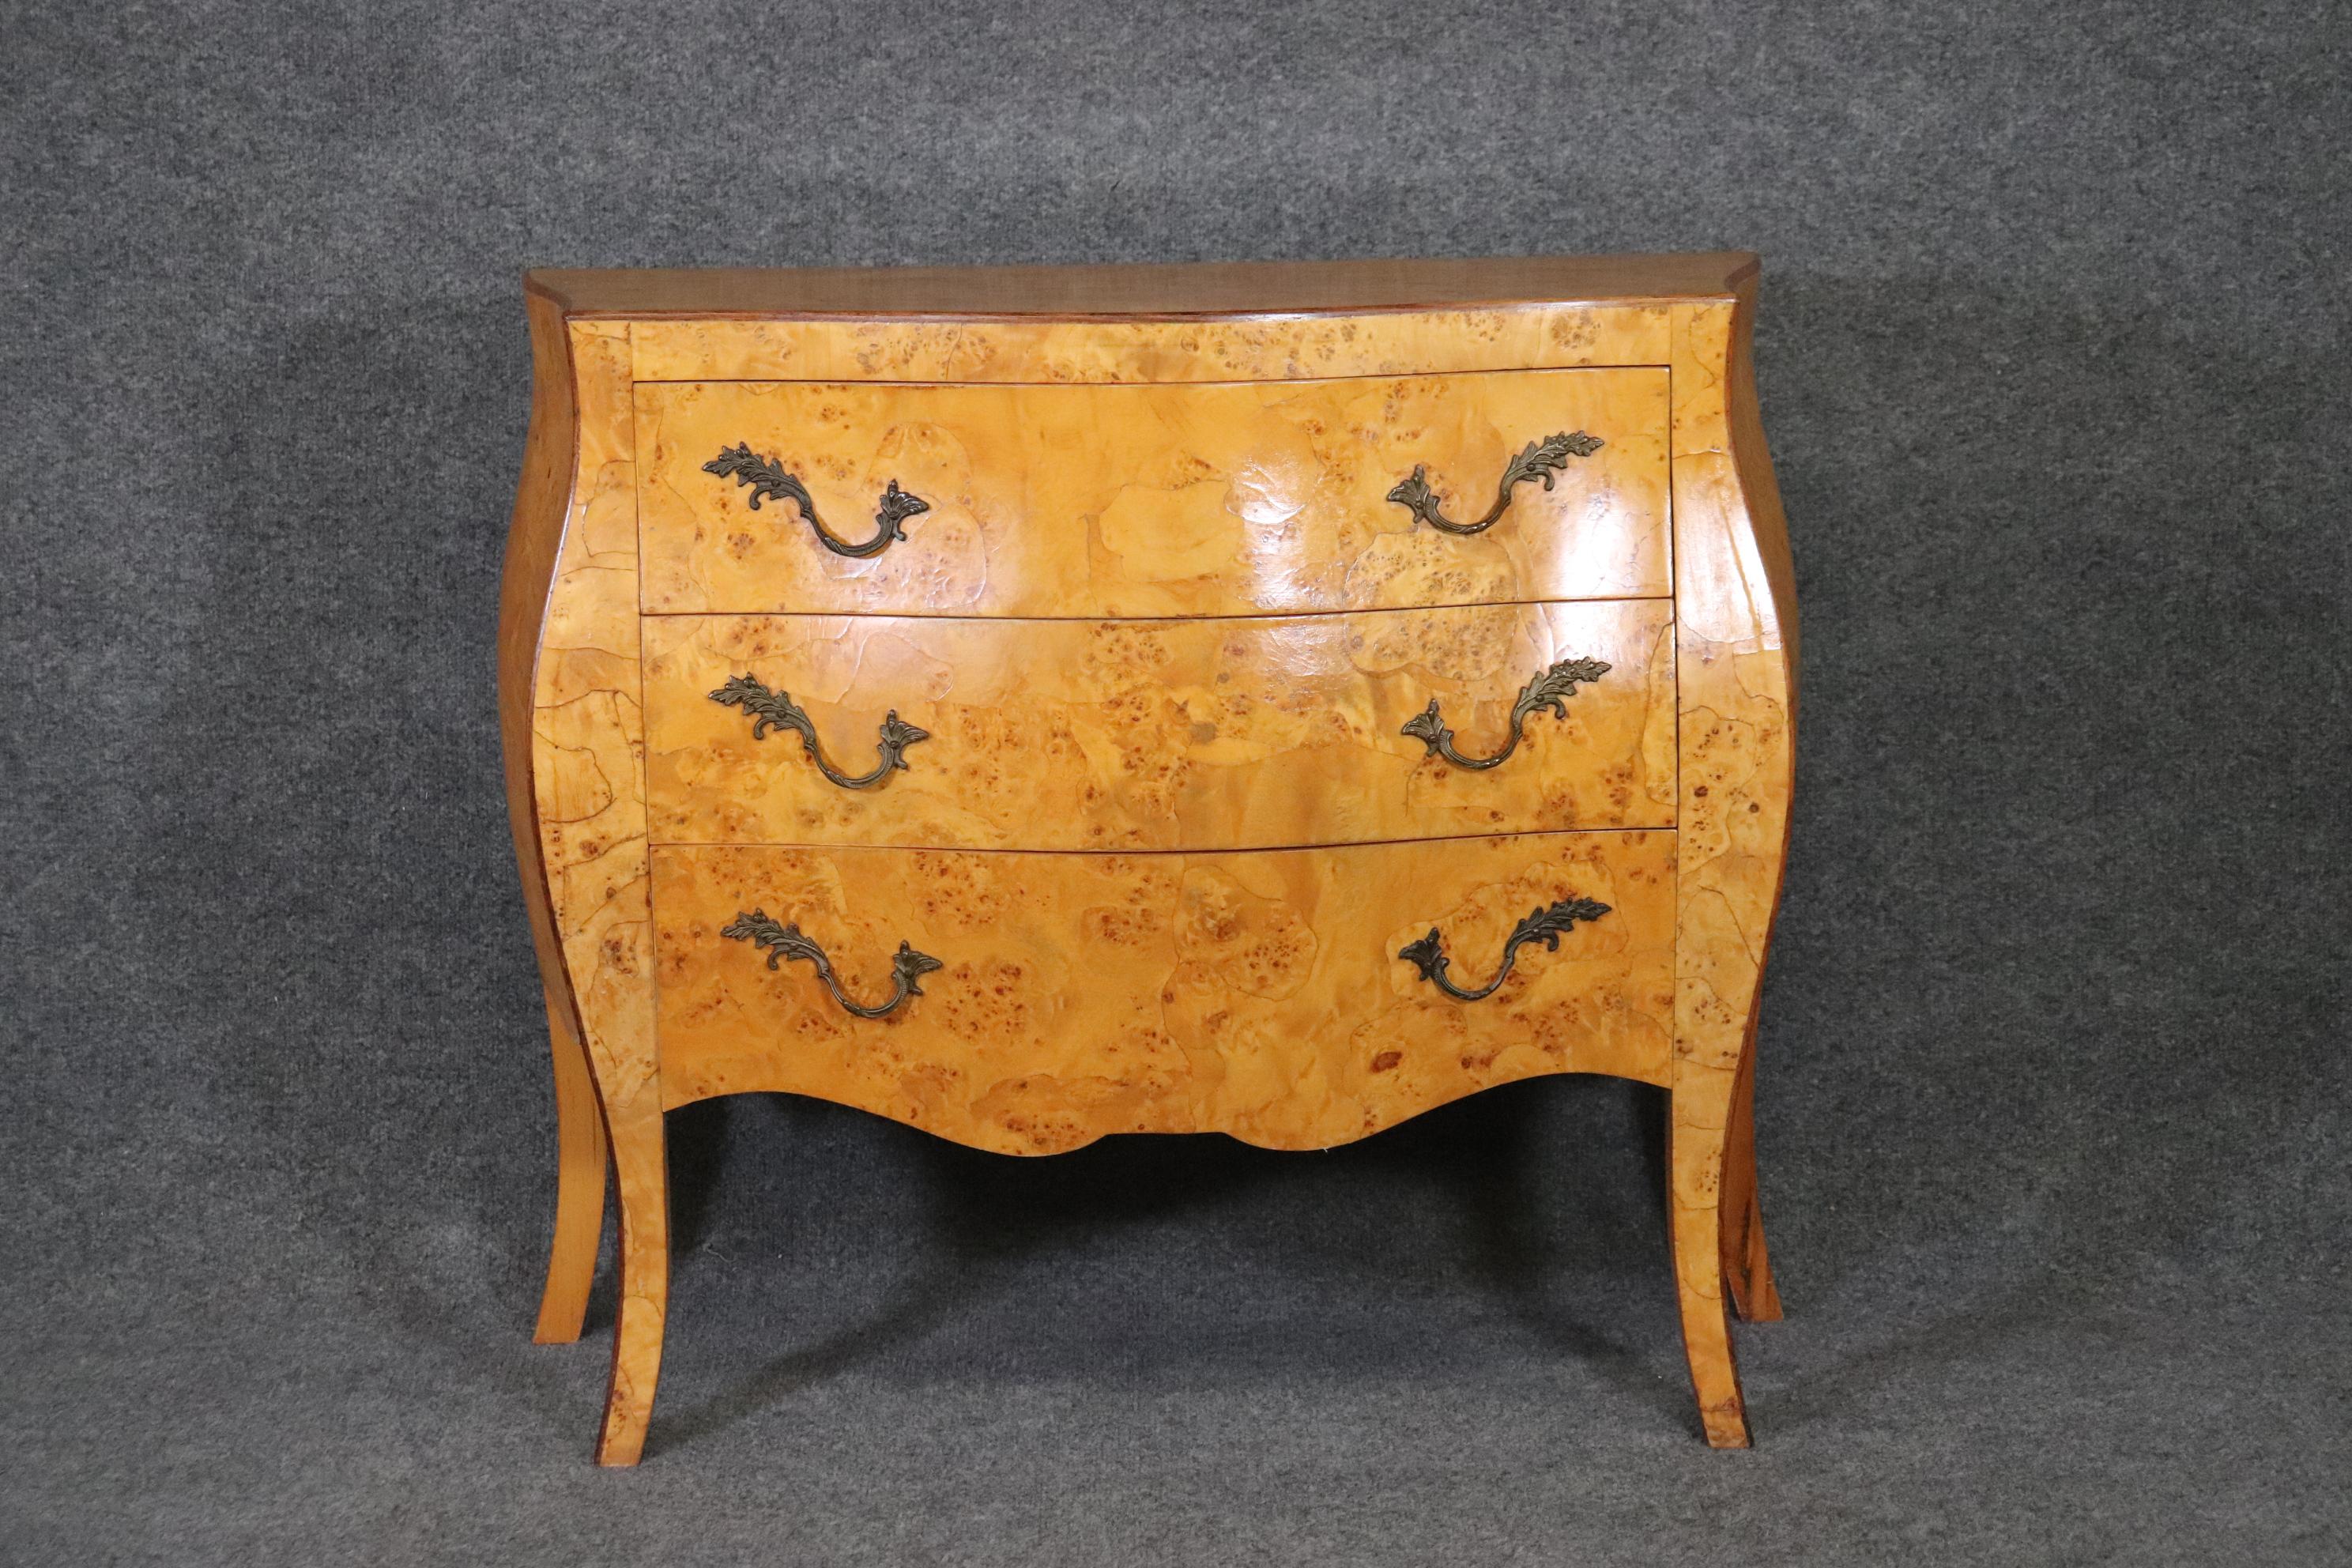 Dimensions- H: 29 1/2in W: 35 1/4in D: 15in
This beautiful Italian olive wood commode, dresser, chest of drawers was made with high quality! the weight of the piece shows that the chest was made with high quality wood. the entire Commode is